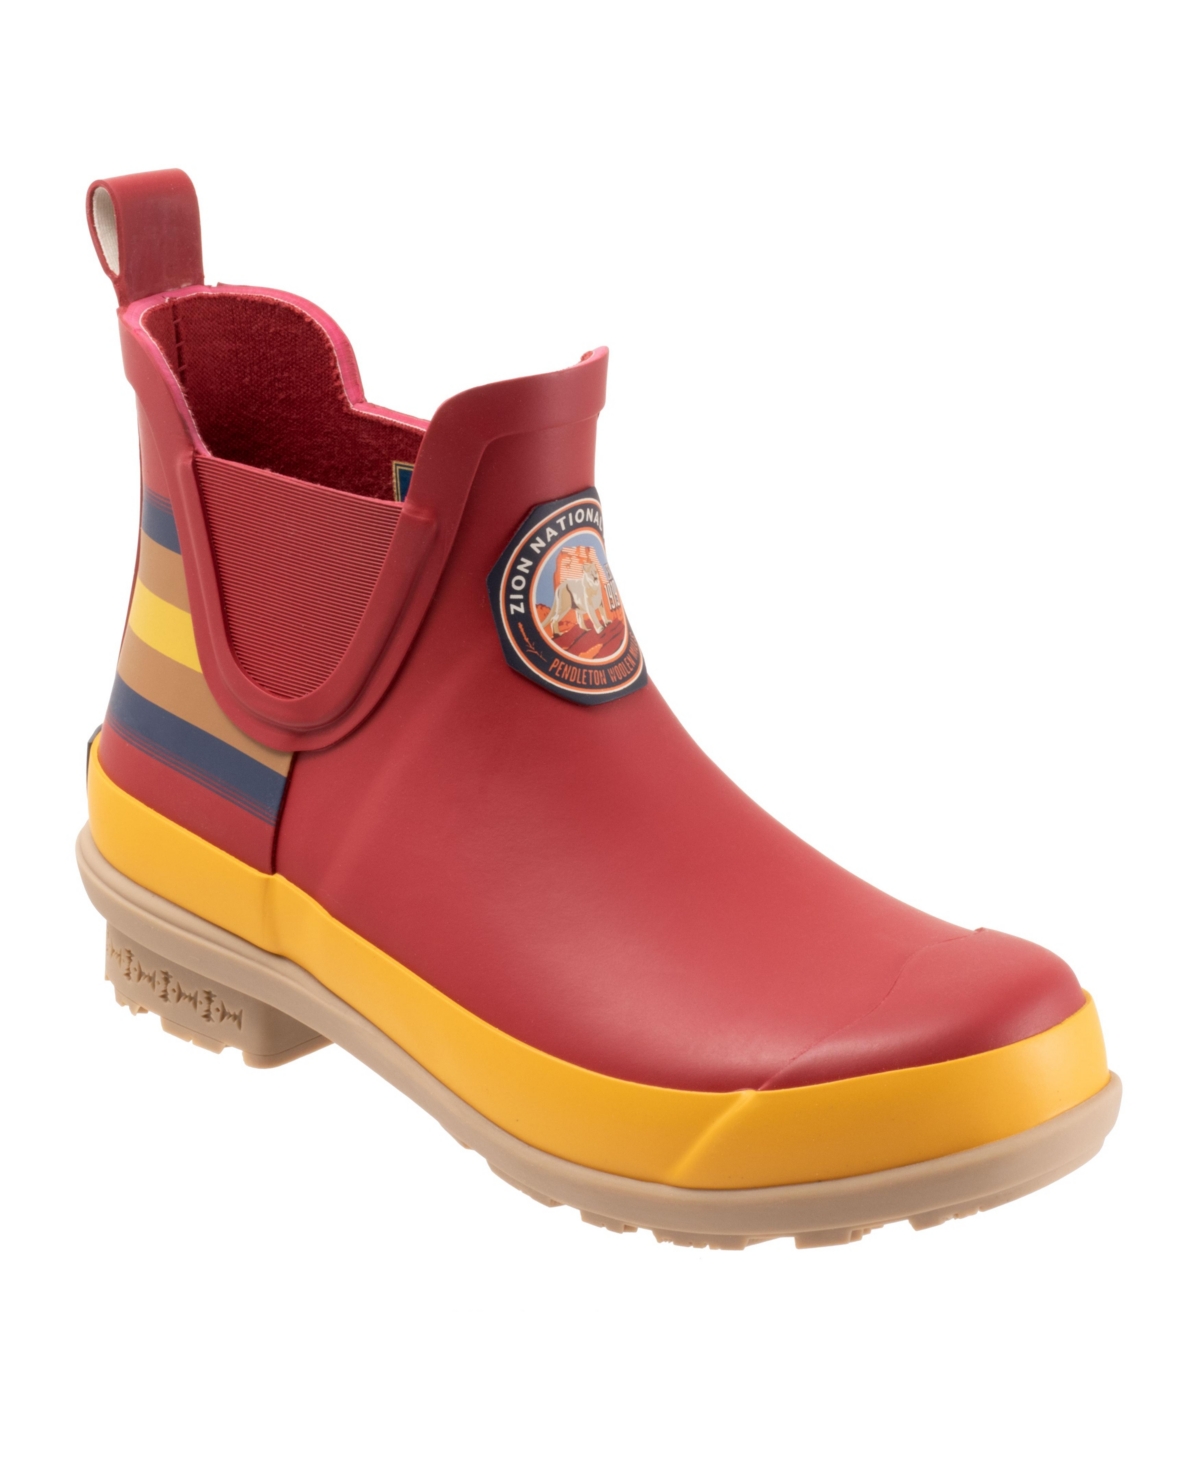 Women's Zion National Park Chelsea Boots - Red